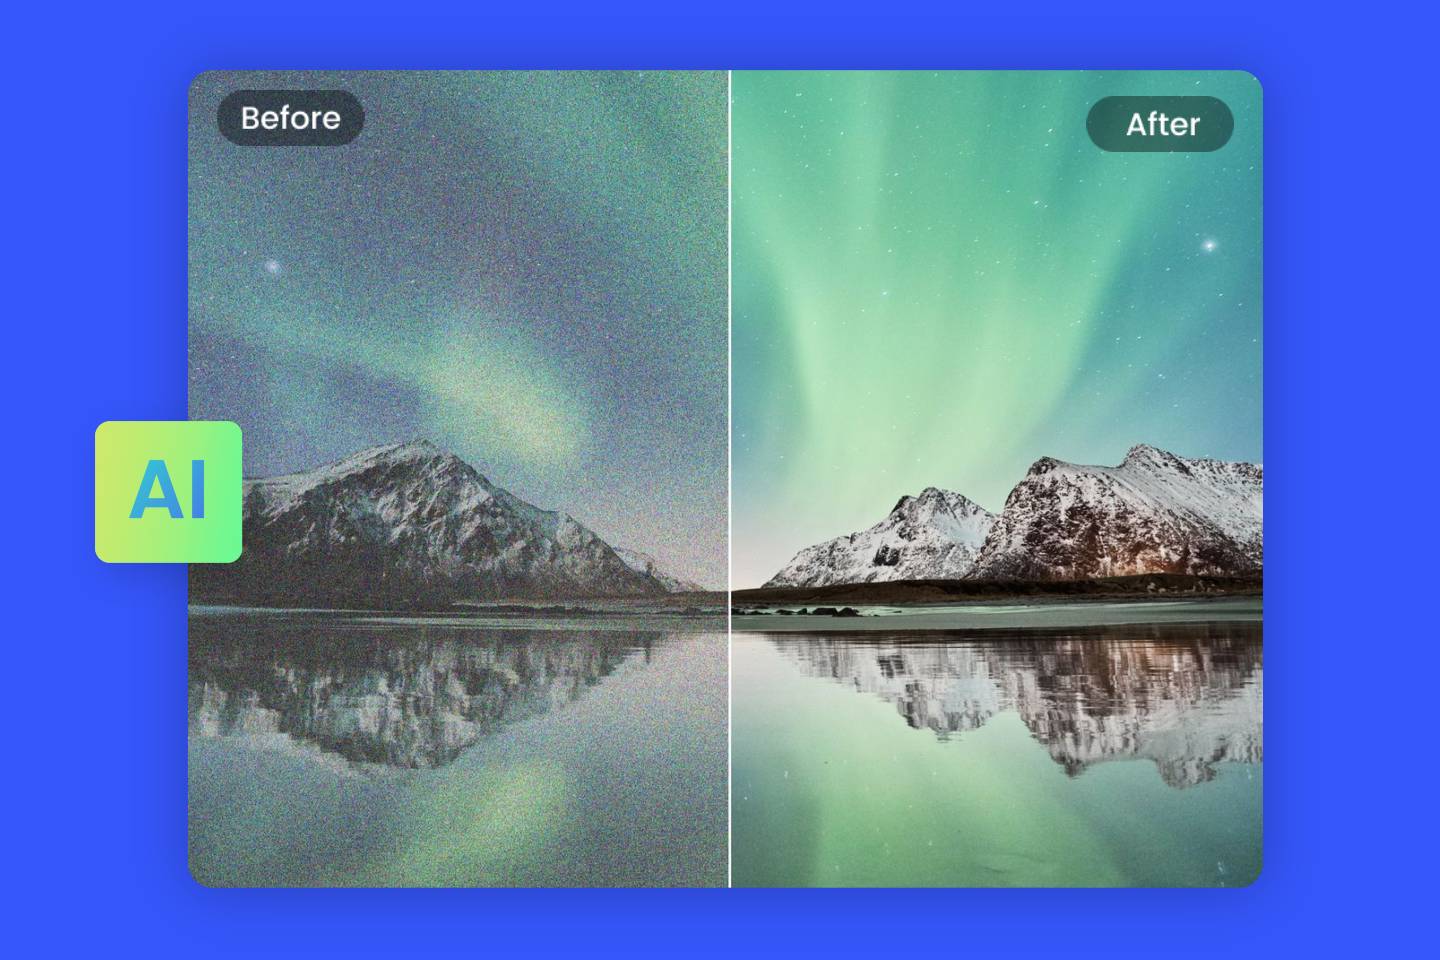 Remove noise from image online instantly with Fotor's AI image denoiser